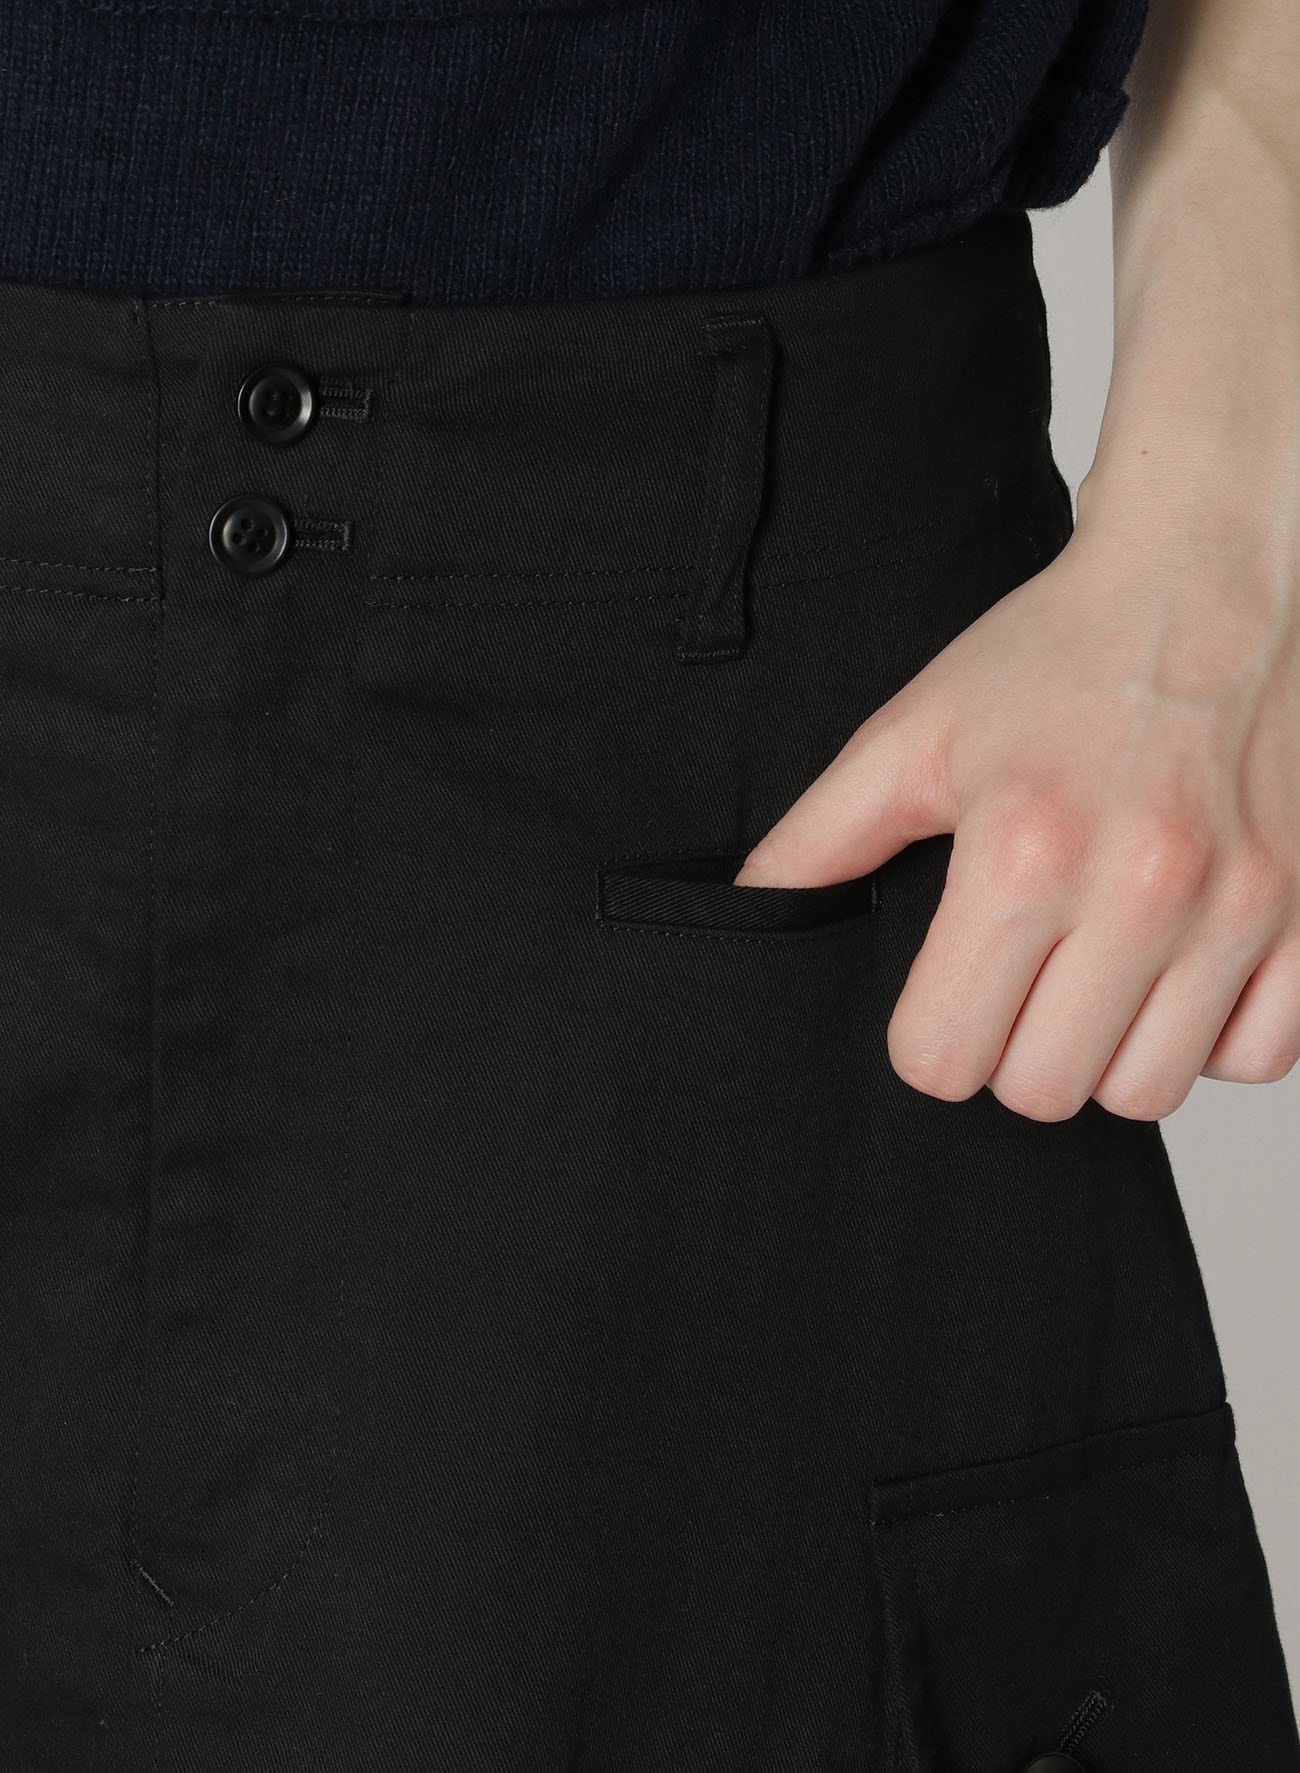 Y's BORN PRODUCT] COTTON TWILL CARGO PANTS-STYLE SKIRT(XS BLACK): Y's